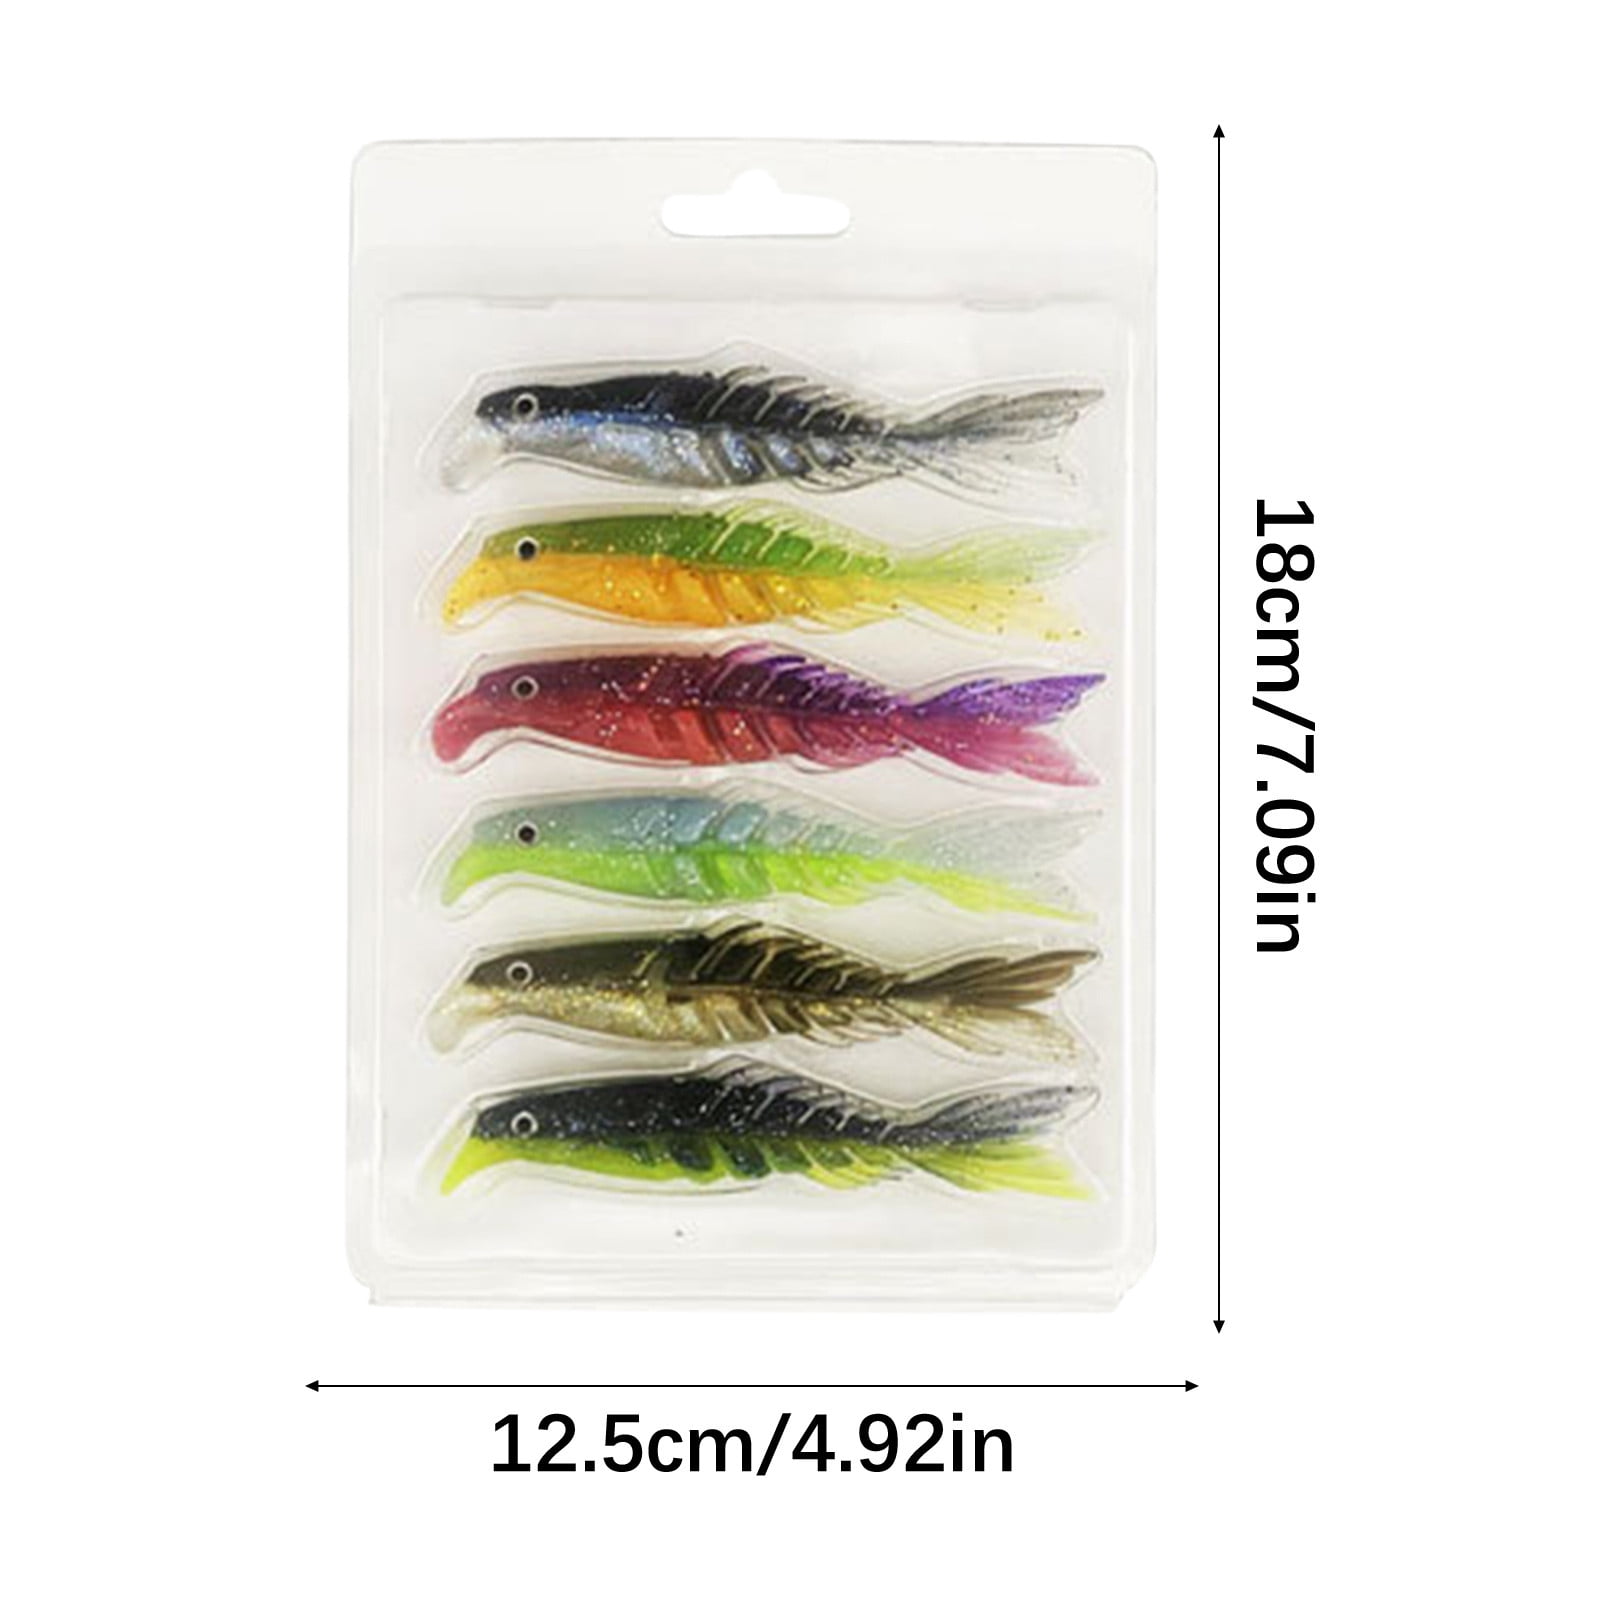 Soft Plastic Baits 30PCS 3.15 in Paddle Tail Swim Bait Realistic Fishing  Lures Waterproof Reusable Soft Swimbaits for Bass Trout Lures Kit